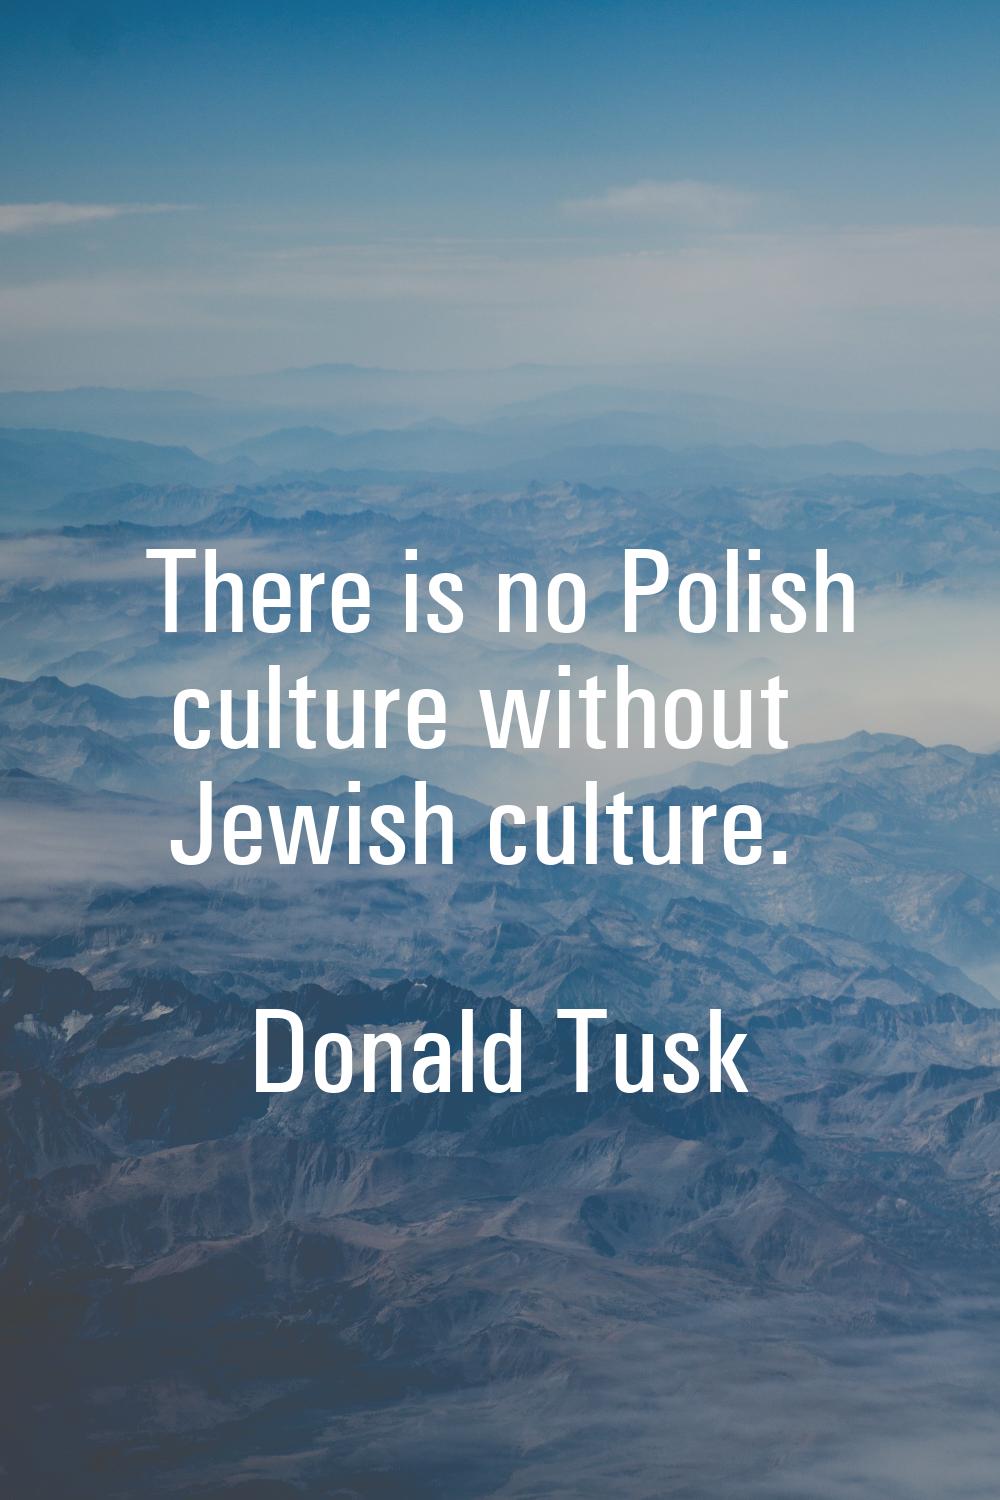 There is no Polish culture without Jewish culture.